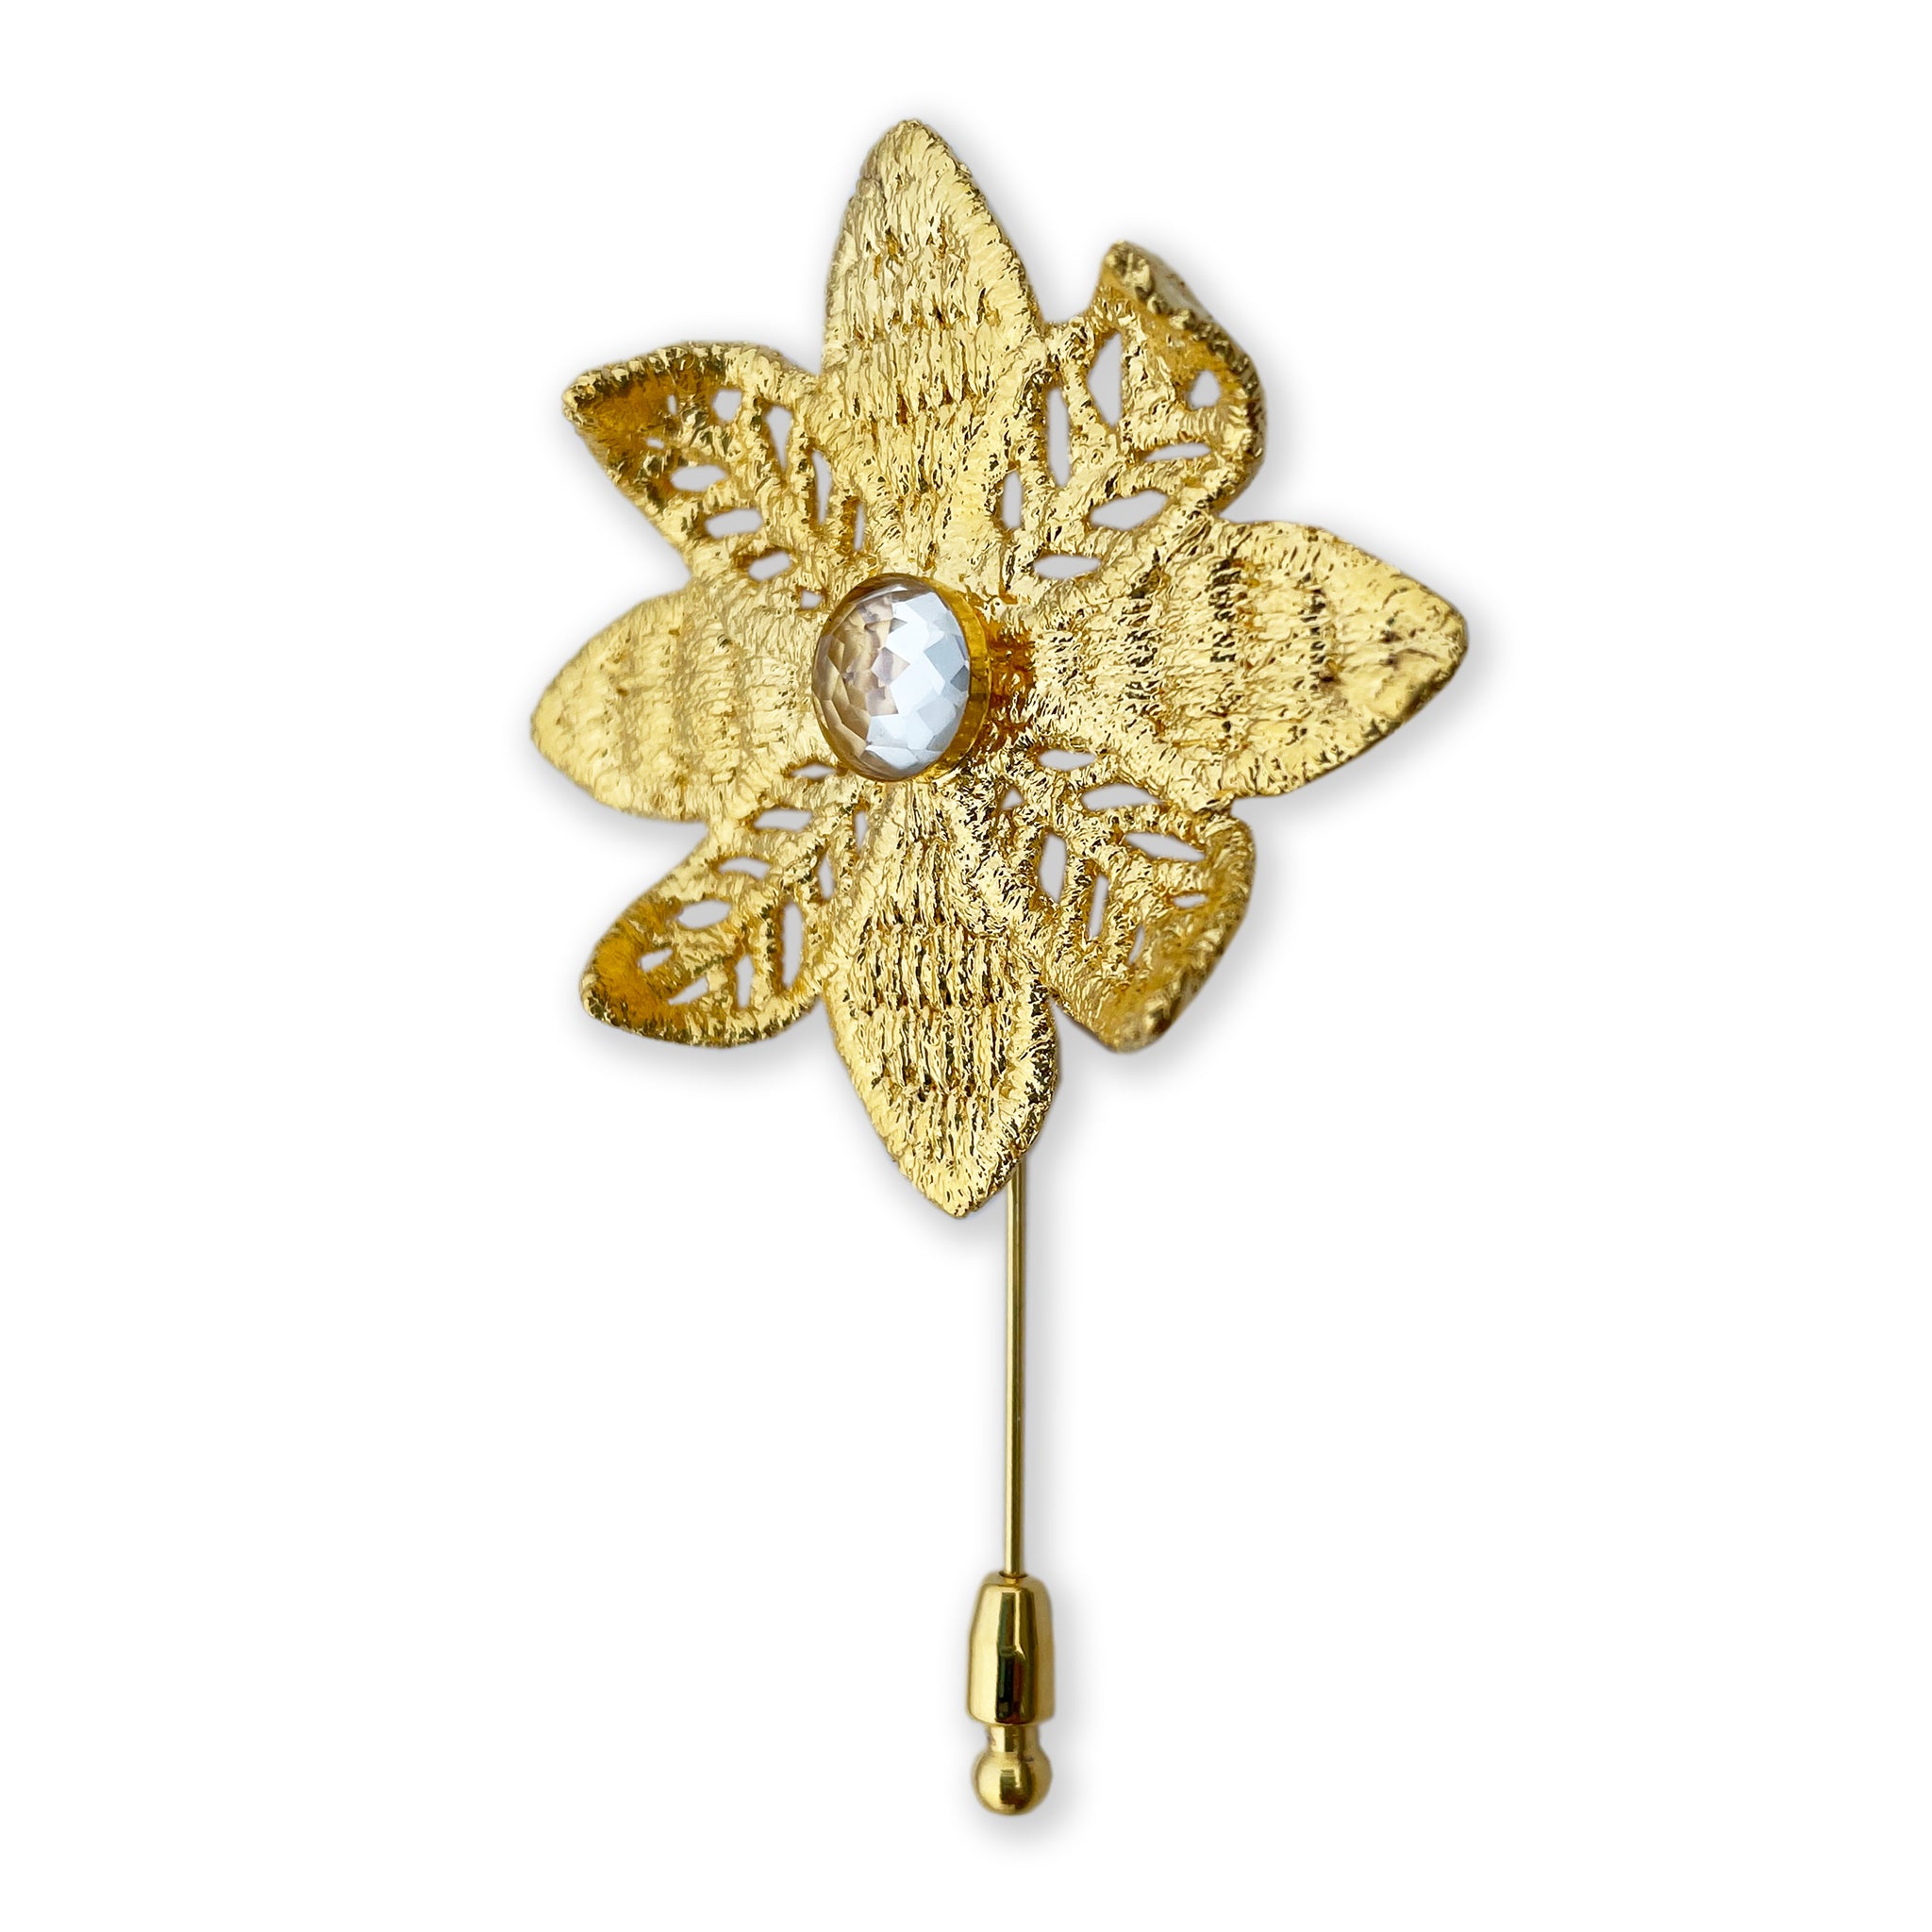 Monika Knutsson Lapel Pin, 24K Gold Lace Flower with Topaz for Wedding